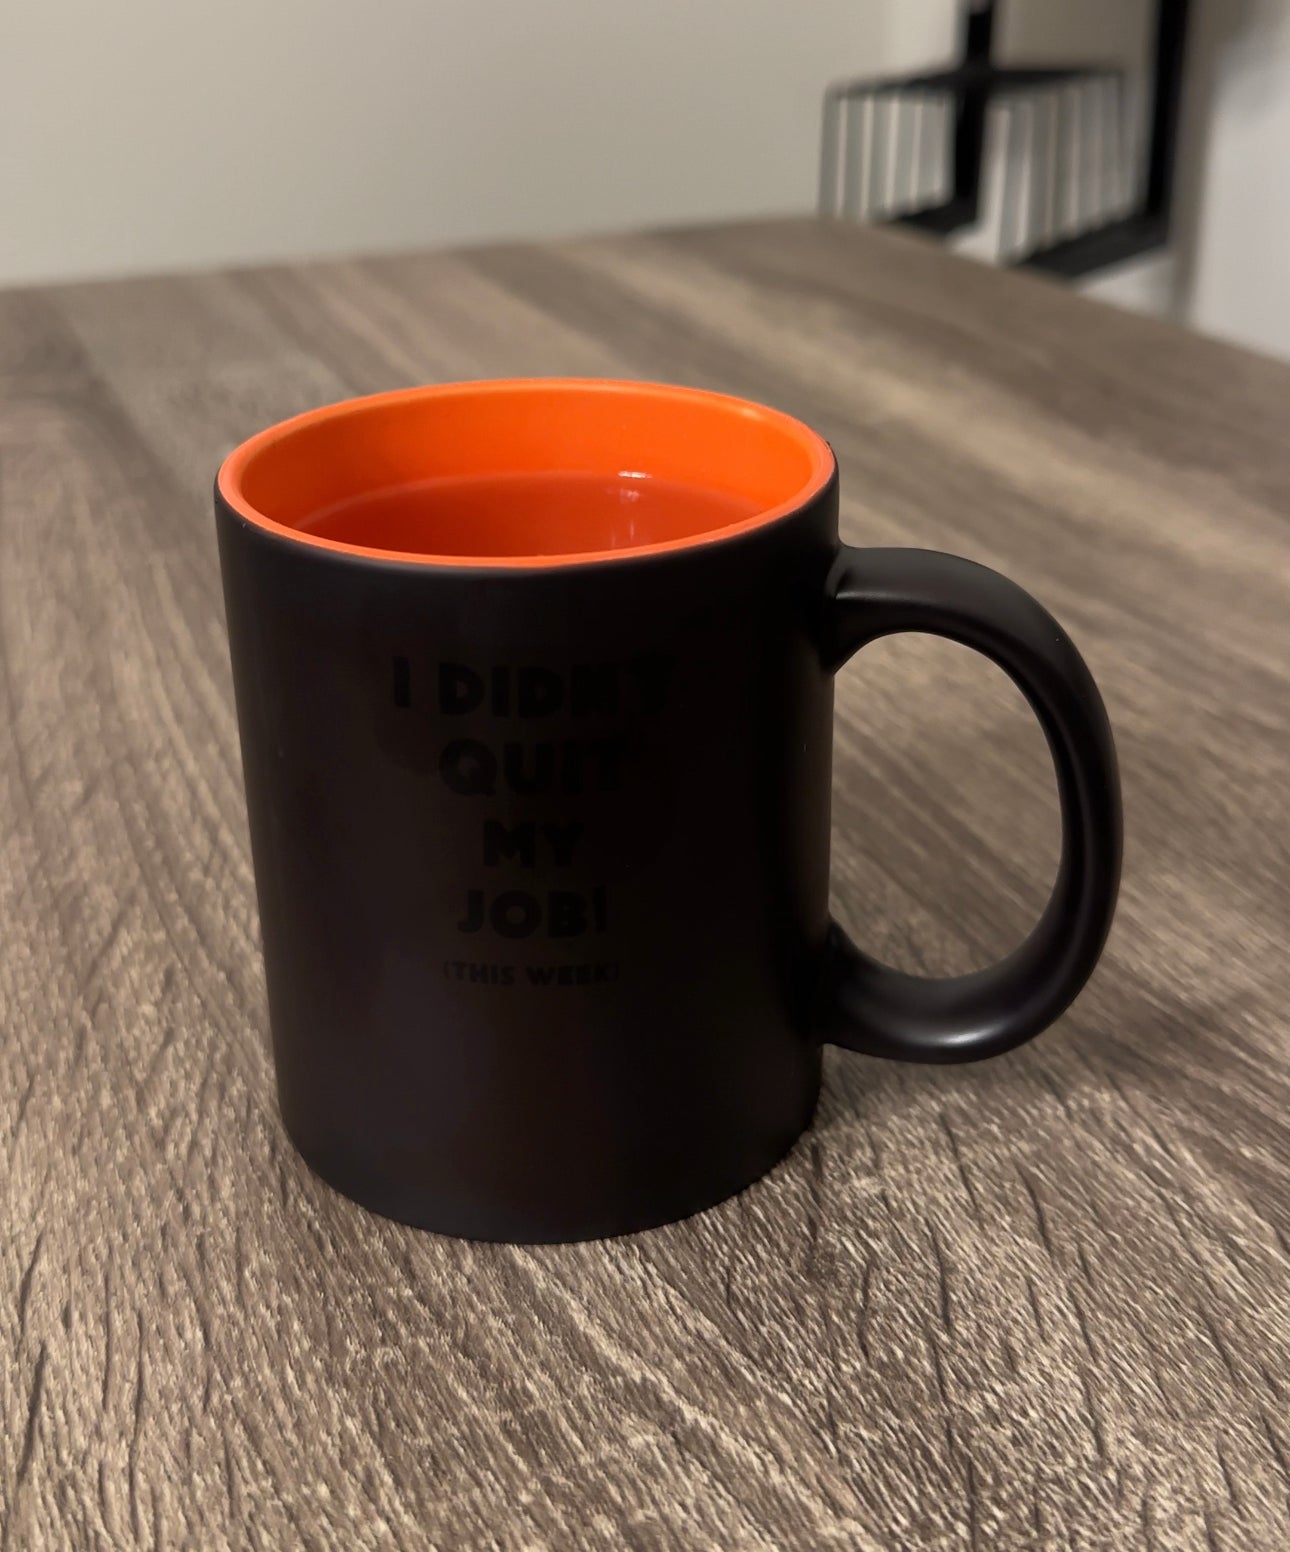 I Didn't Quit My Job This Week Color Changing Coffee Mug